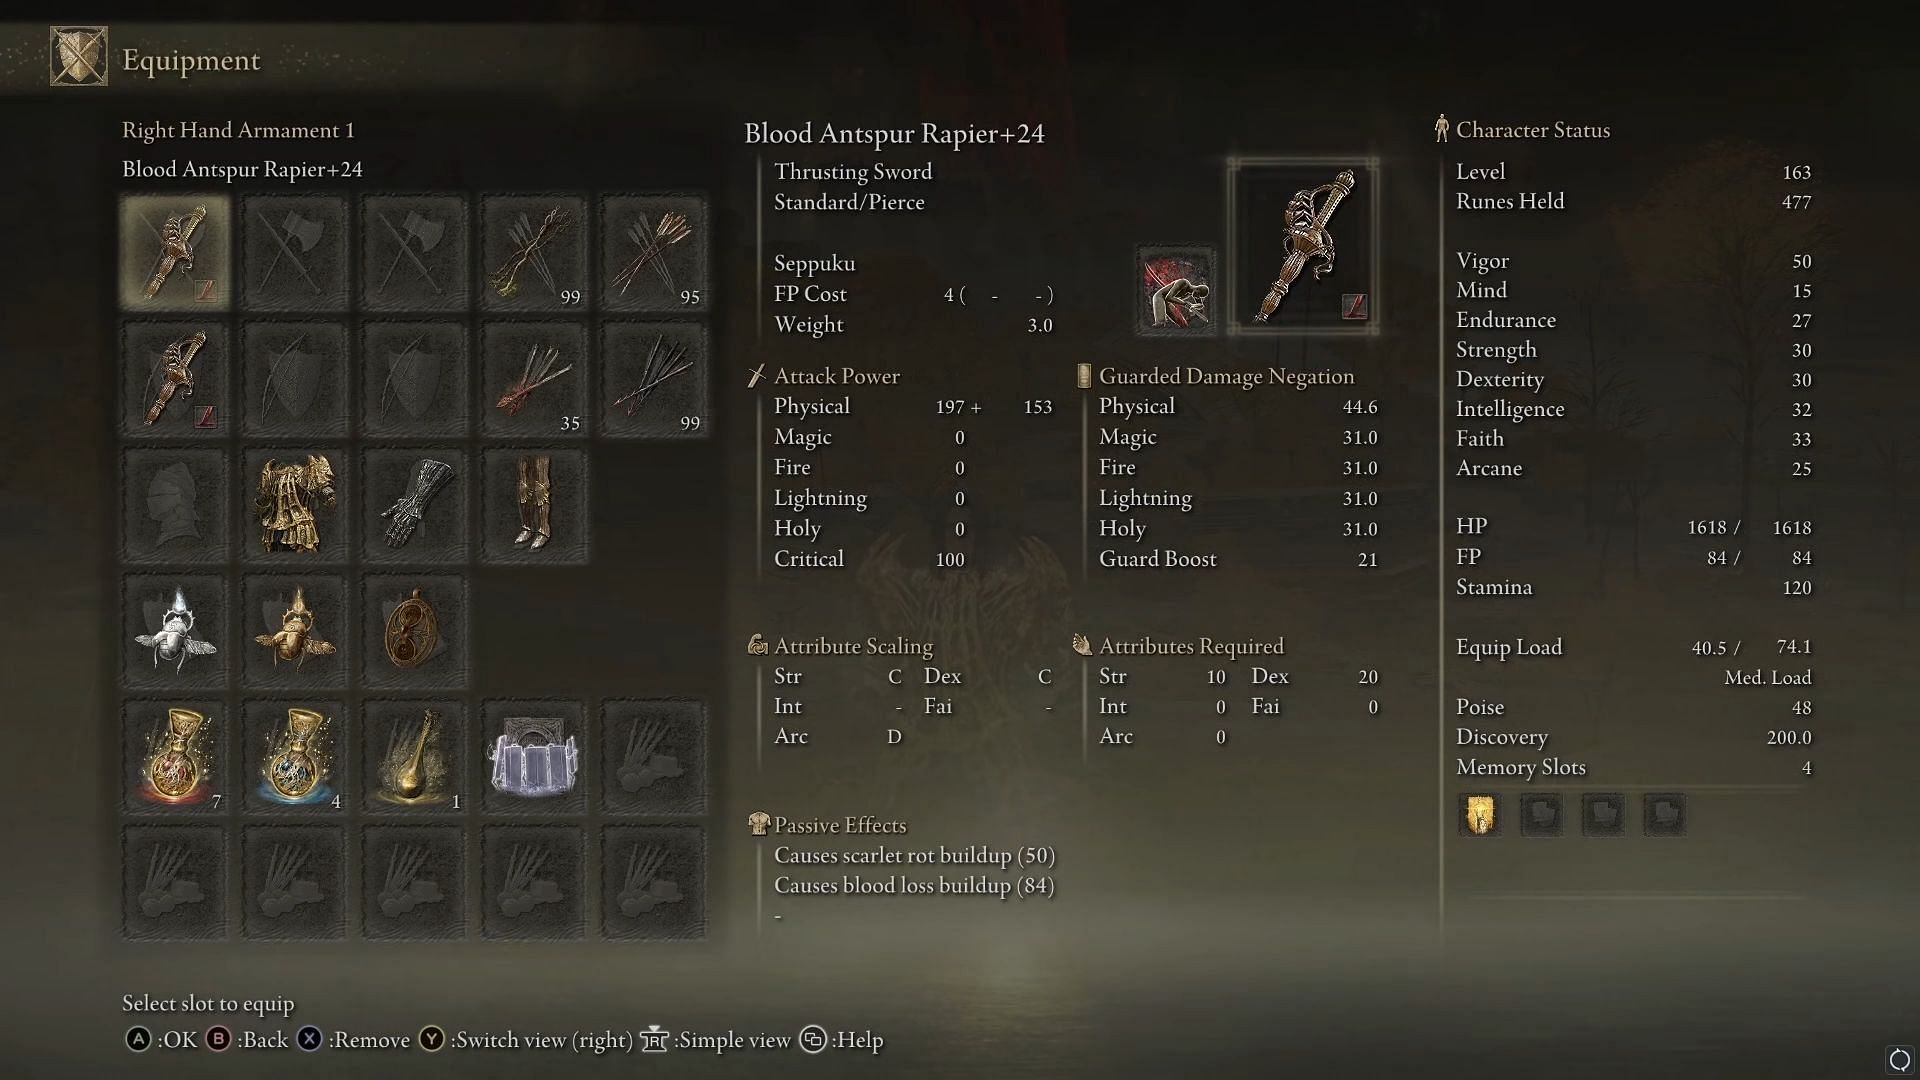  When infused with Bleed, Antspur Rapier can do a lot of damage in Elden Ring (Image via Kibbles/YouTube)